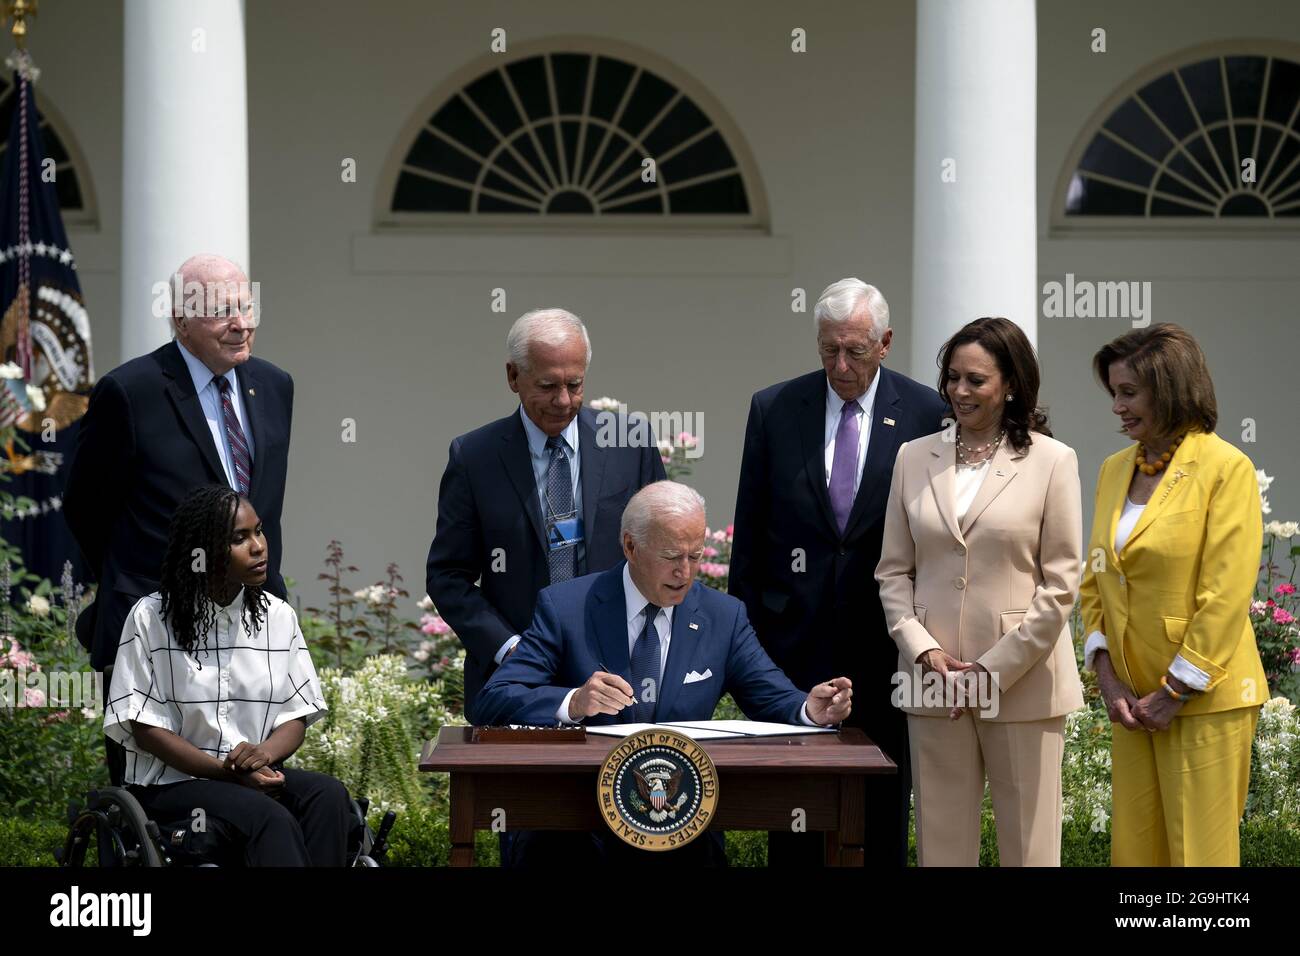 Tyree Brown, from left, Senator Patrick Leahy, a Democrat from Vermont, former Representative Tony Coelho, House Majority Leader Steny Hoyer, a Democrat from Maryland, U.S. Vice President Kamala Harris, and Speaker of the House Nancy Pelosi, a Democrat from California, applaud as U.S. President Joe Biden, center, signs a proclamation during an event marking the 31st anniversary of the Americans with Disabilities Act (ADA) in the Rose Garden of the White House in Washington, DC, U.S., on Monday, July 26, 2021. The Biden administration is keeping foreign travel restrictions in place amid conce Stock Photo